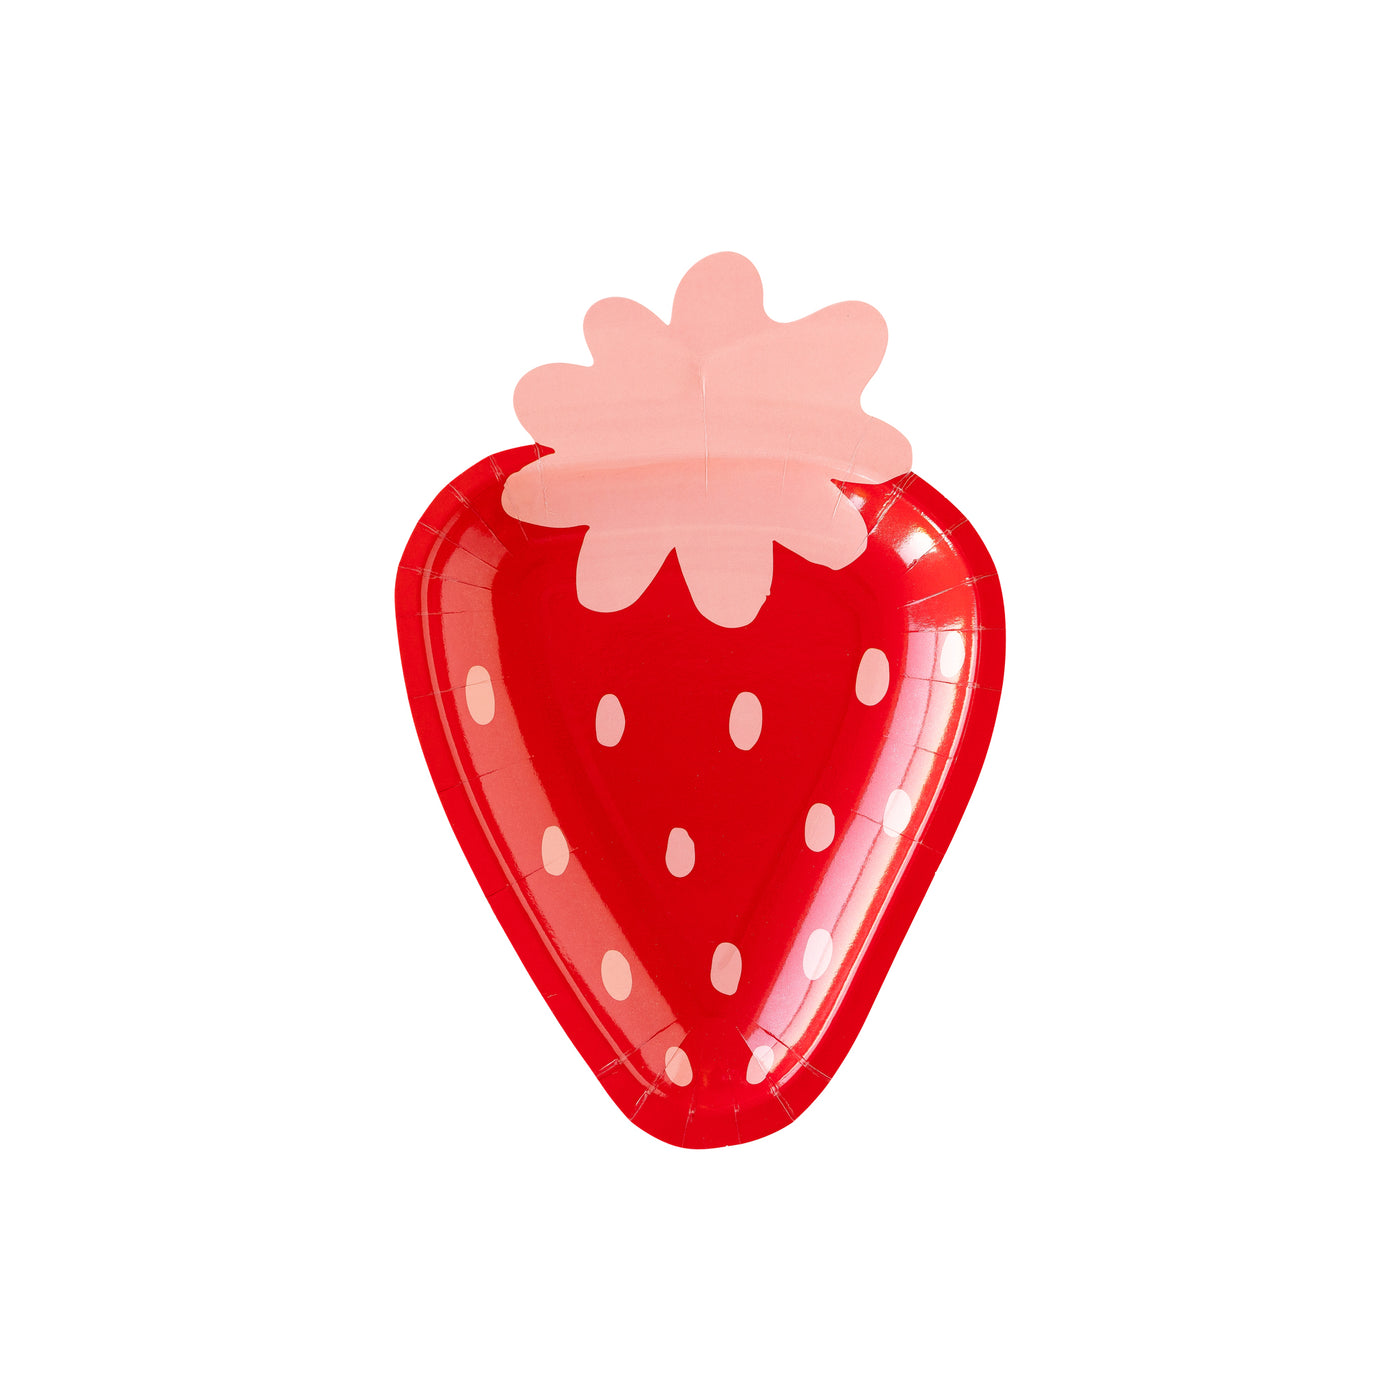 PLPL103 - Strawberry Shaped Paper Plate